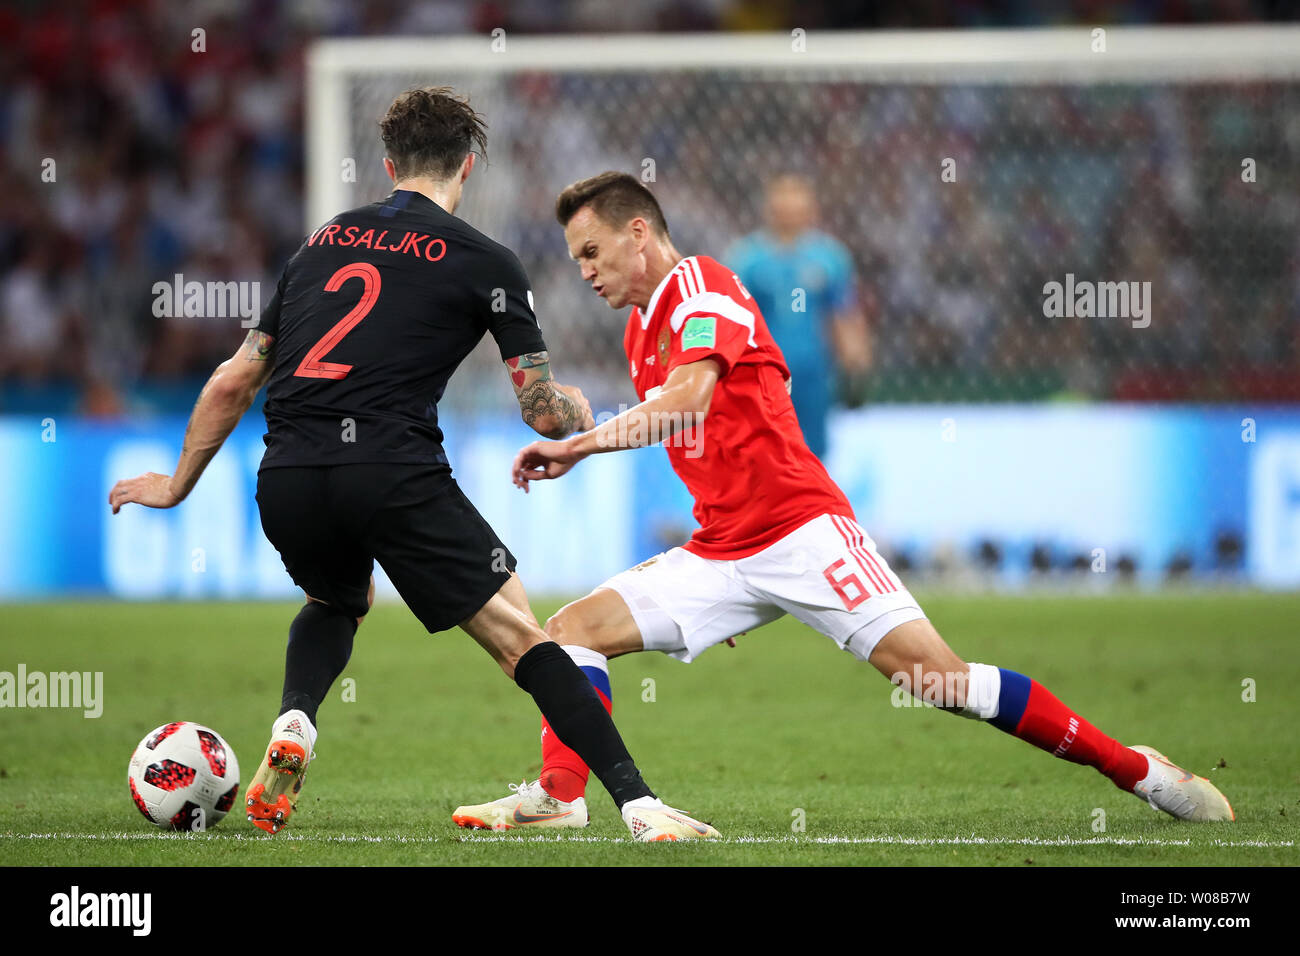 Denis Cheryshev (R) of Russia competes for the ball with Sime Vrsaljko of Croatia during the 2018 FIFA World Cup quarter-final match at Fisht Stadium in Sochi, Russia on July 7, 2018. Croatia beat Russia 4-3 on penalties to advance to the semi-finals. Photo by Chris Brunskill/UPI Stock Photo